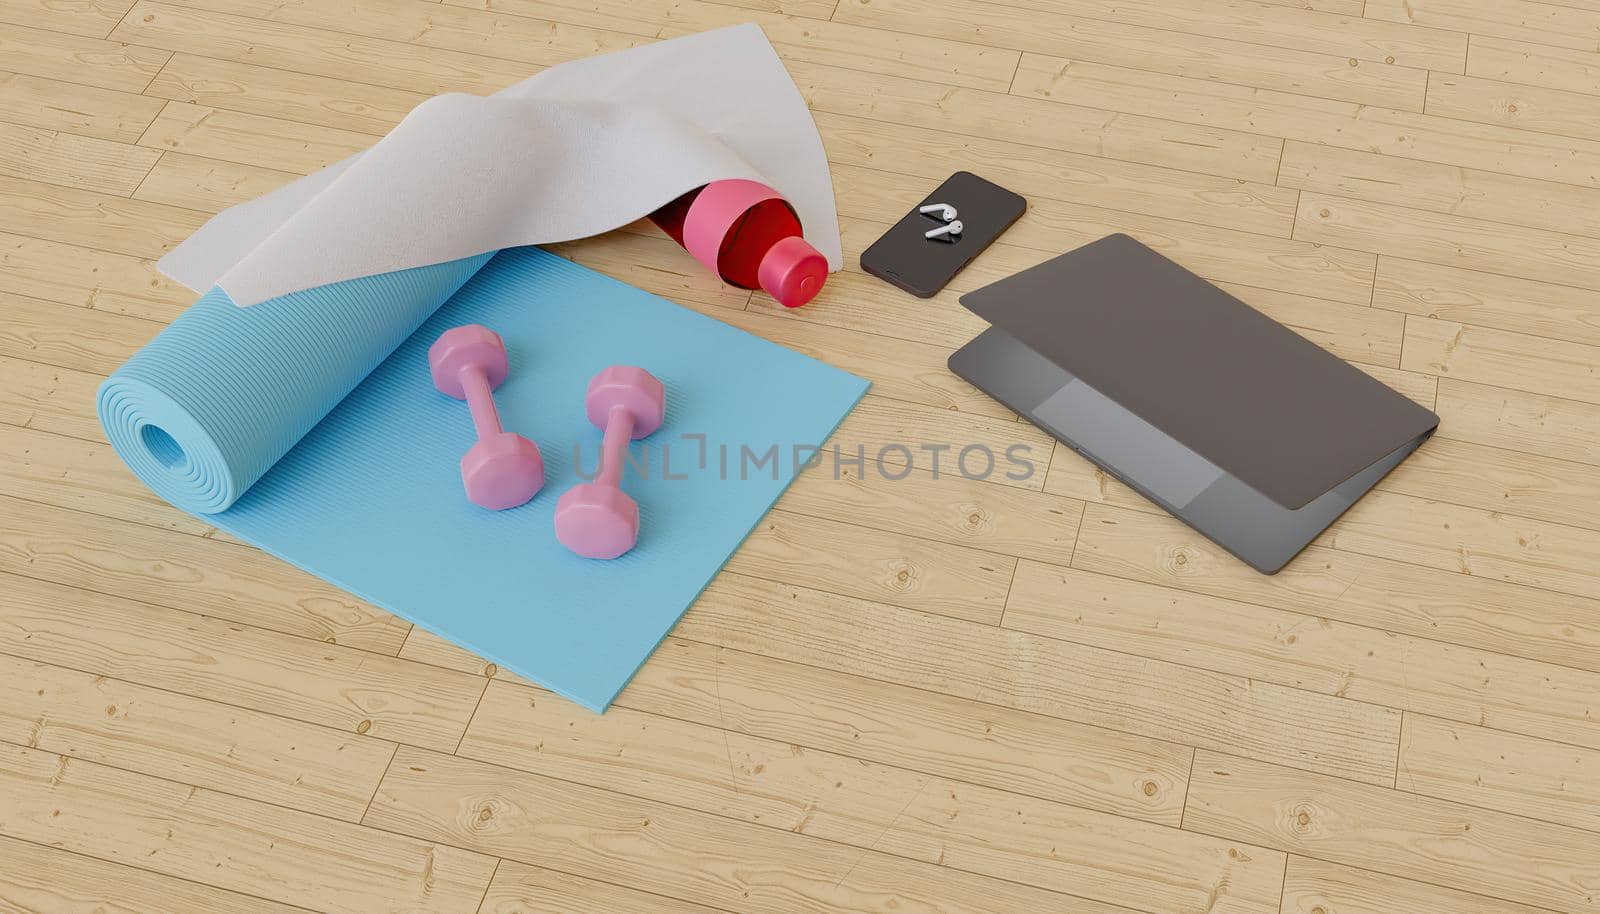 exercise mat with dumbbells, mobile phone, computer and headphones by asolano